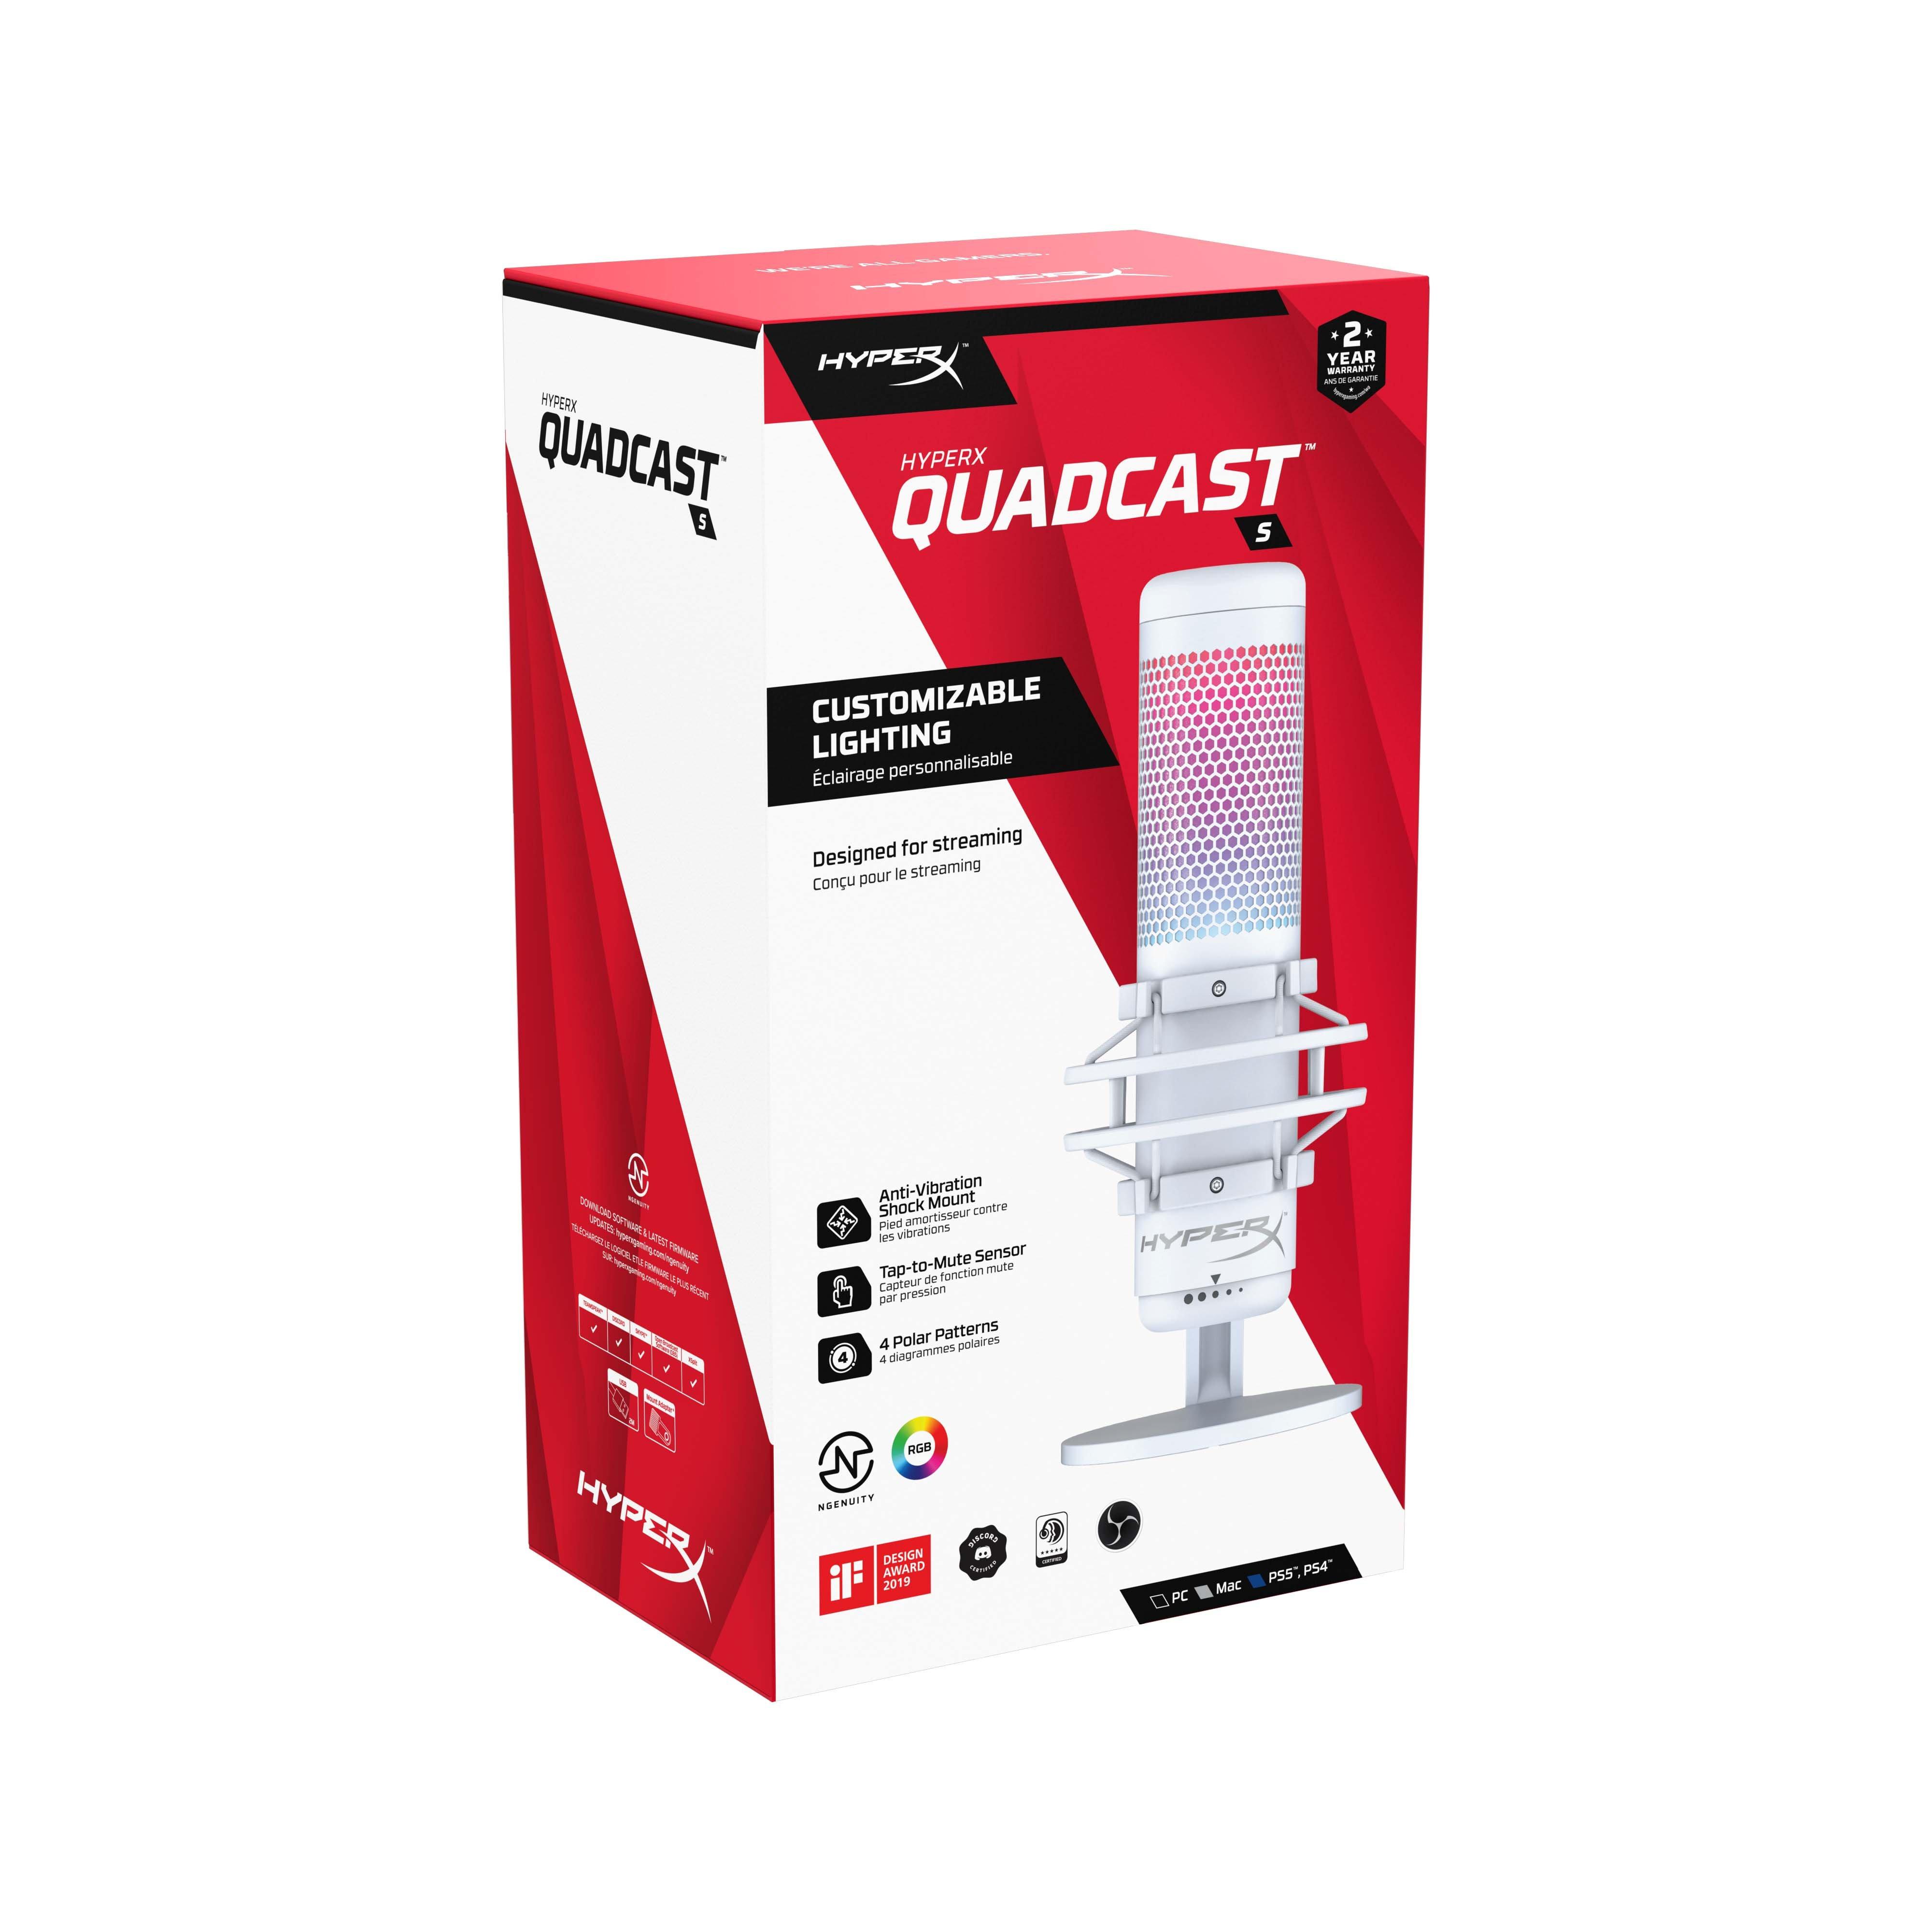 HyperX QuadCast S RGB USB Condenser Microphone with Shock Mount for Gaming,  Streaming, Podcasts